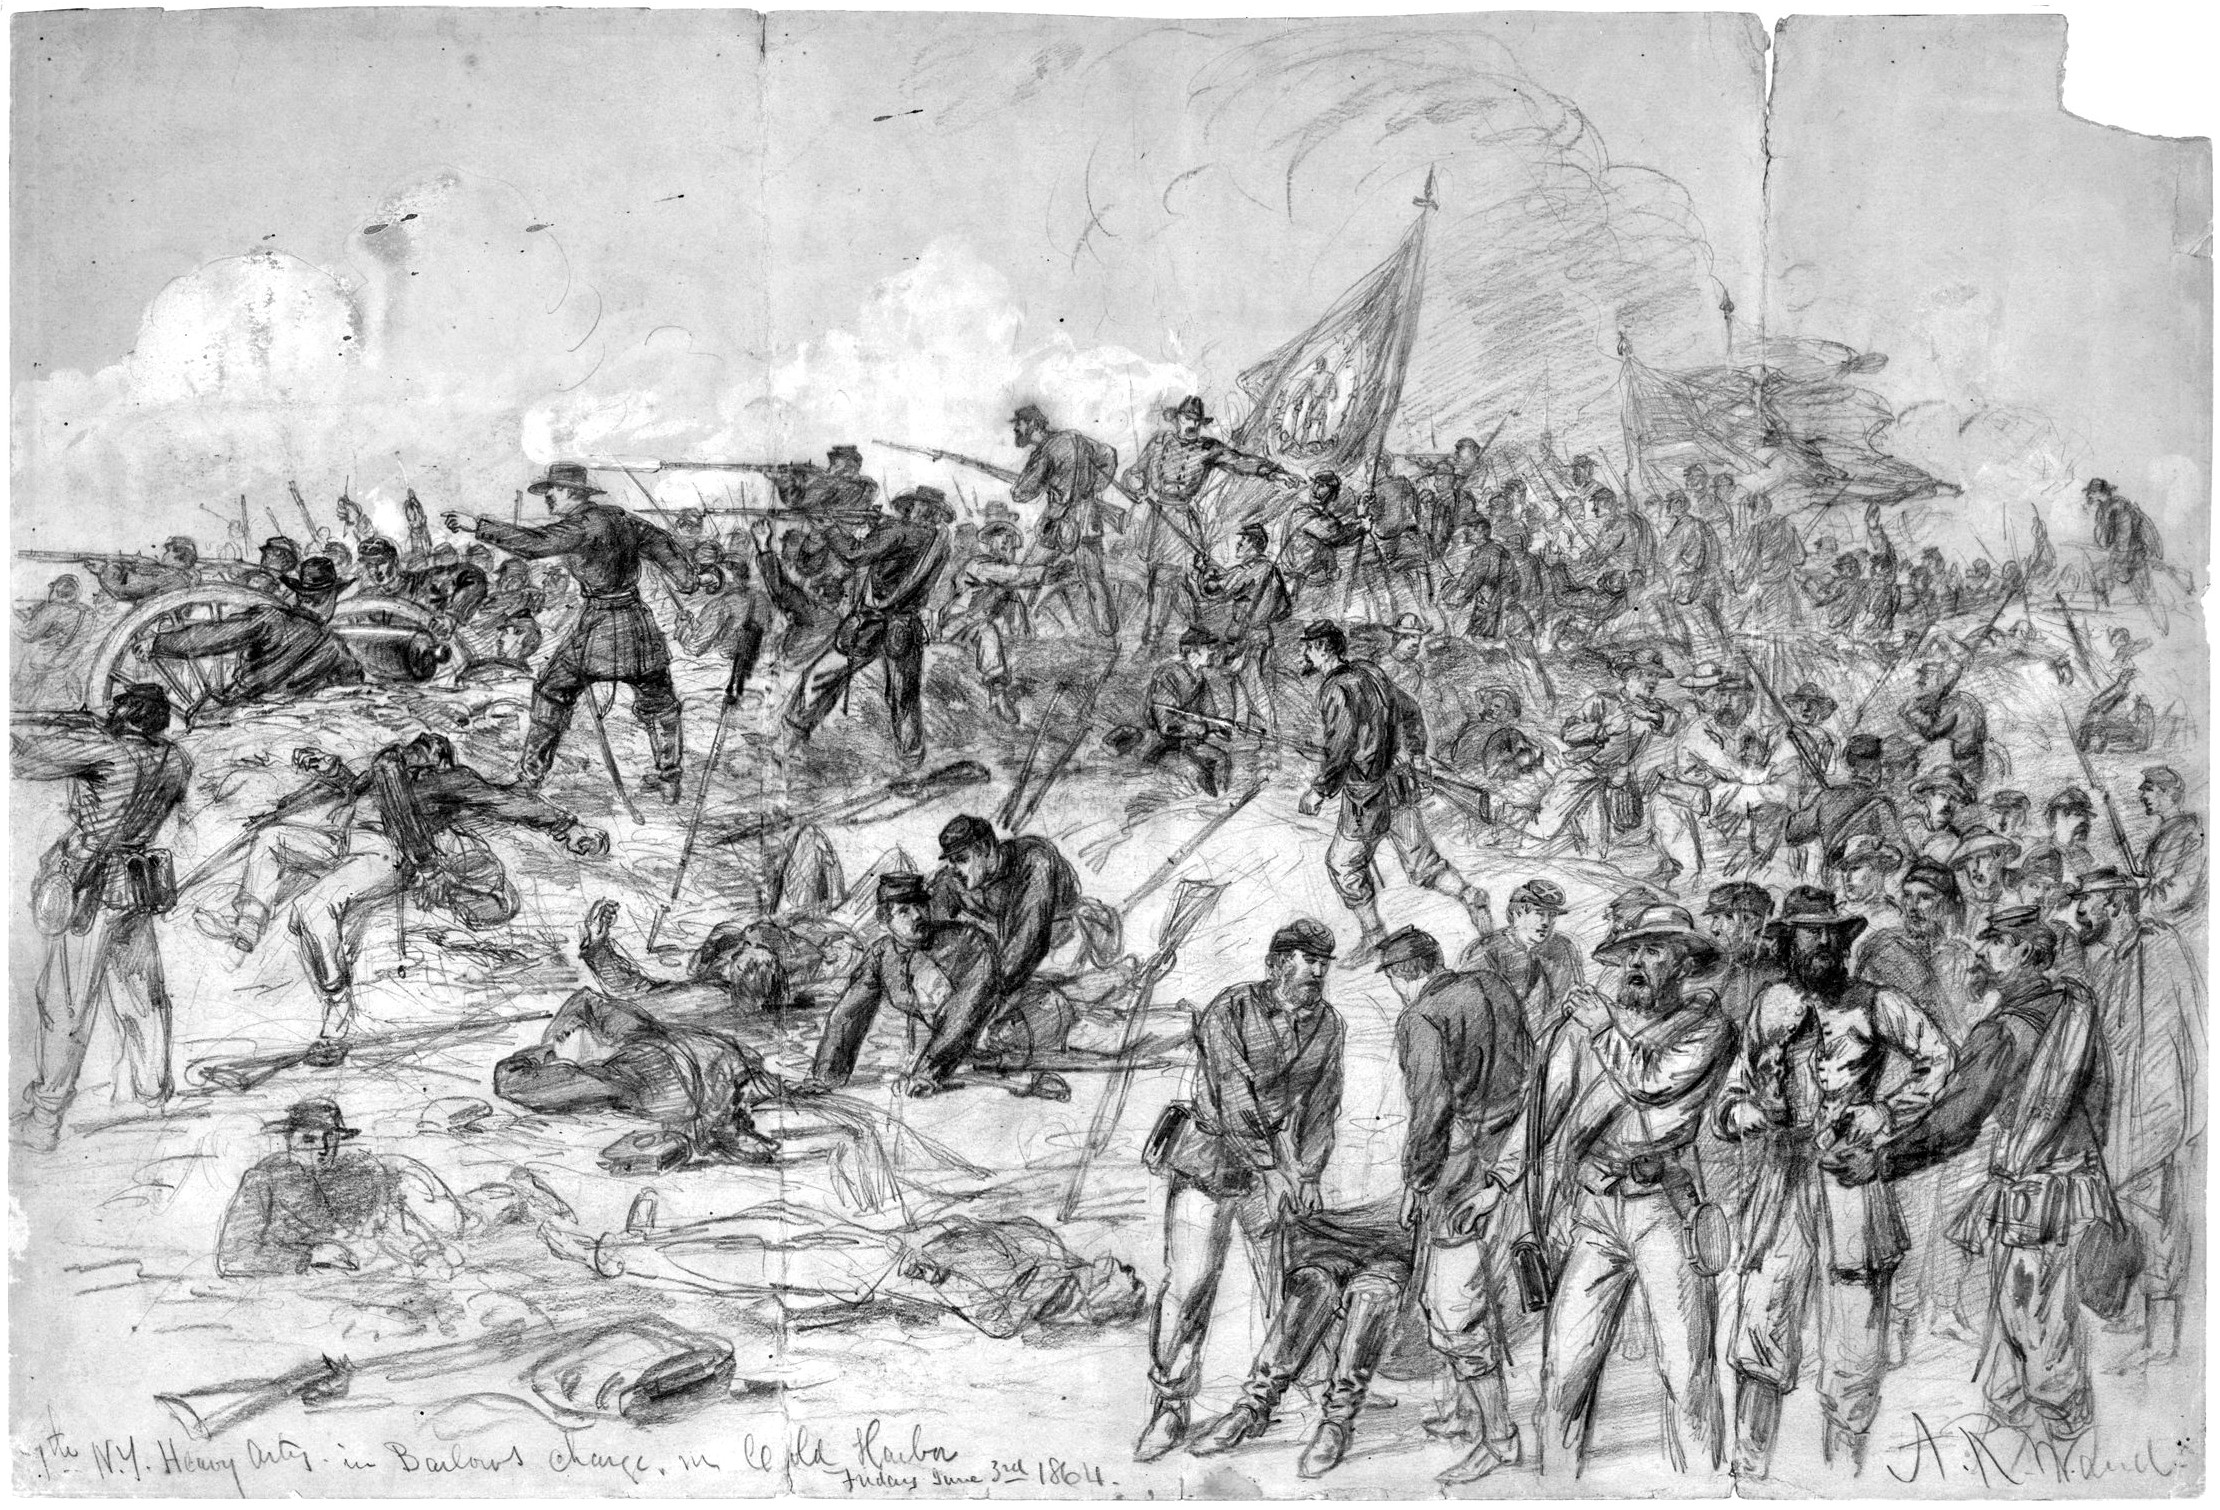 The 7th New York Heavy Artillery of Brigadier General Francis Barlow’s 1st Division made a spirited attack on the Confederate works at Cold Harbor. They overran the first line of Lee’s defense, capturing prisoners and turning captured guns on the Confederates before being pushed back when their success went unsupported.